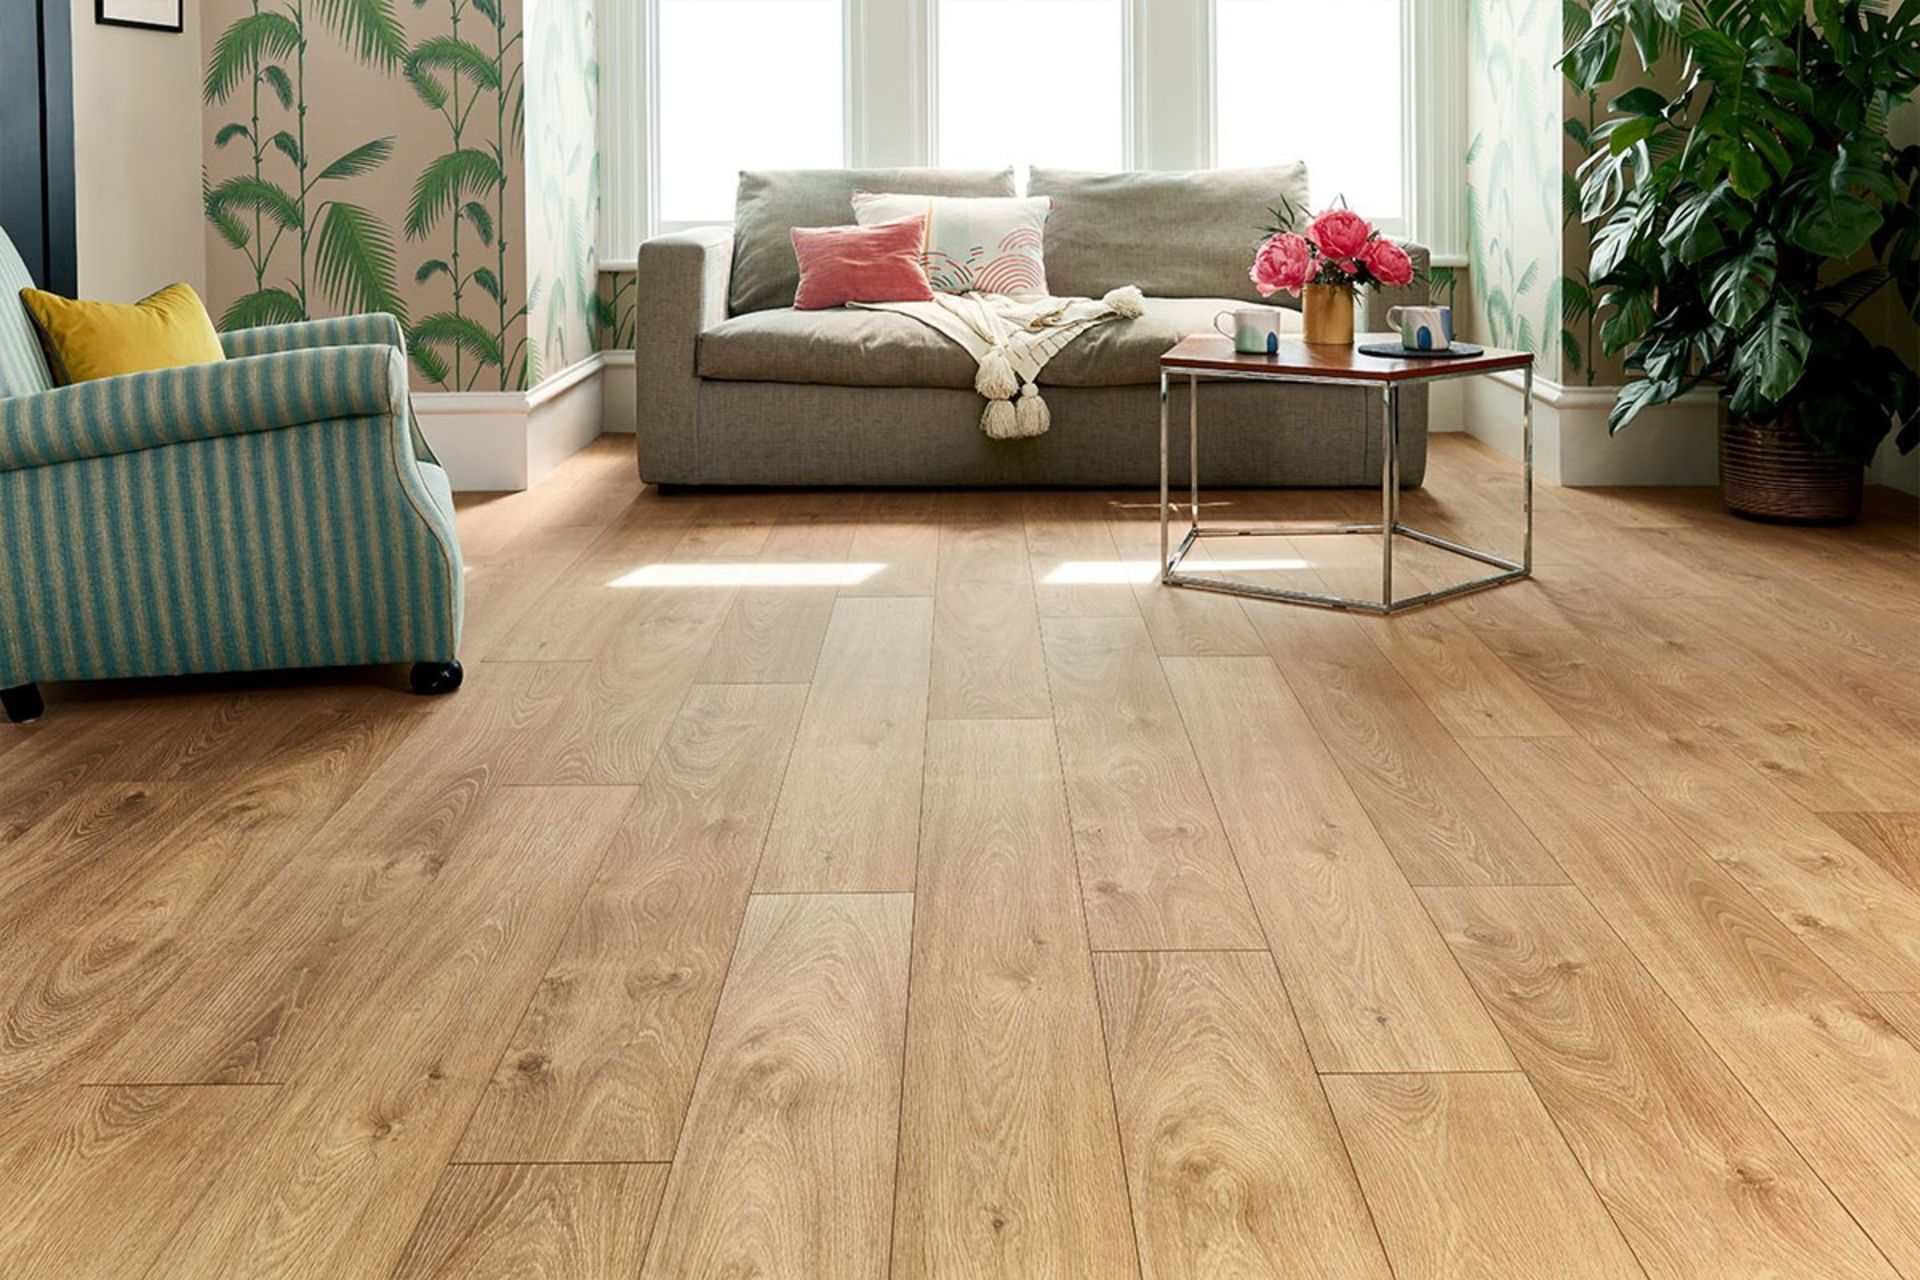 7.4mm2 Navelli Oak Laminate Flooring Bevel Edged.12mm Thick, 4 Sided, 1285x192x12mm.With a natu...